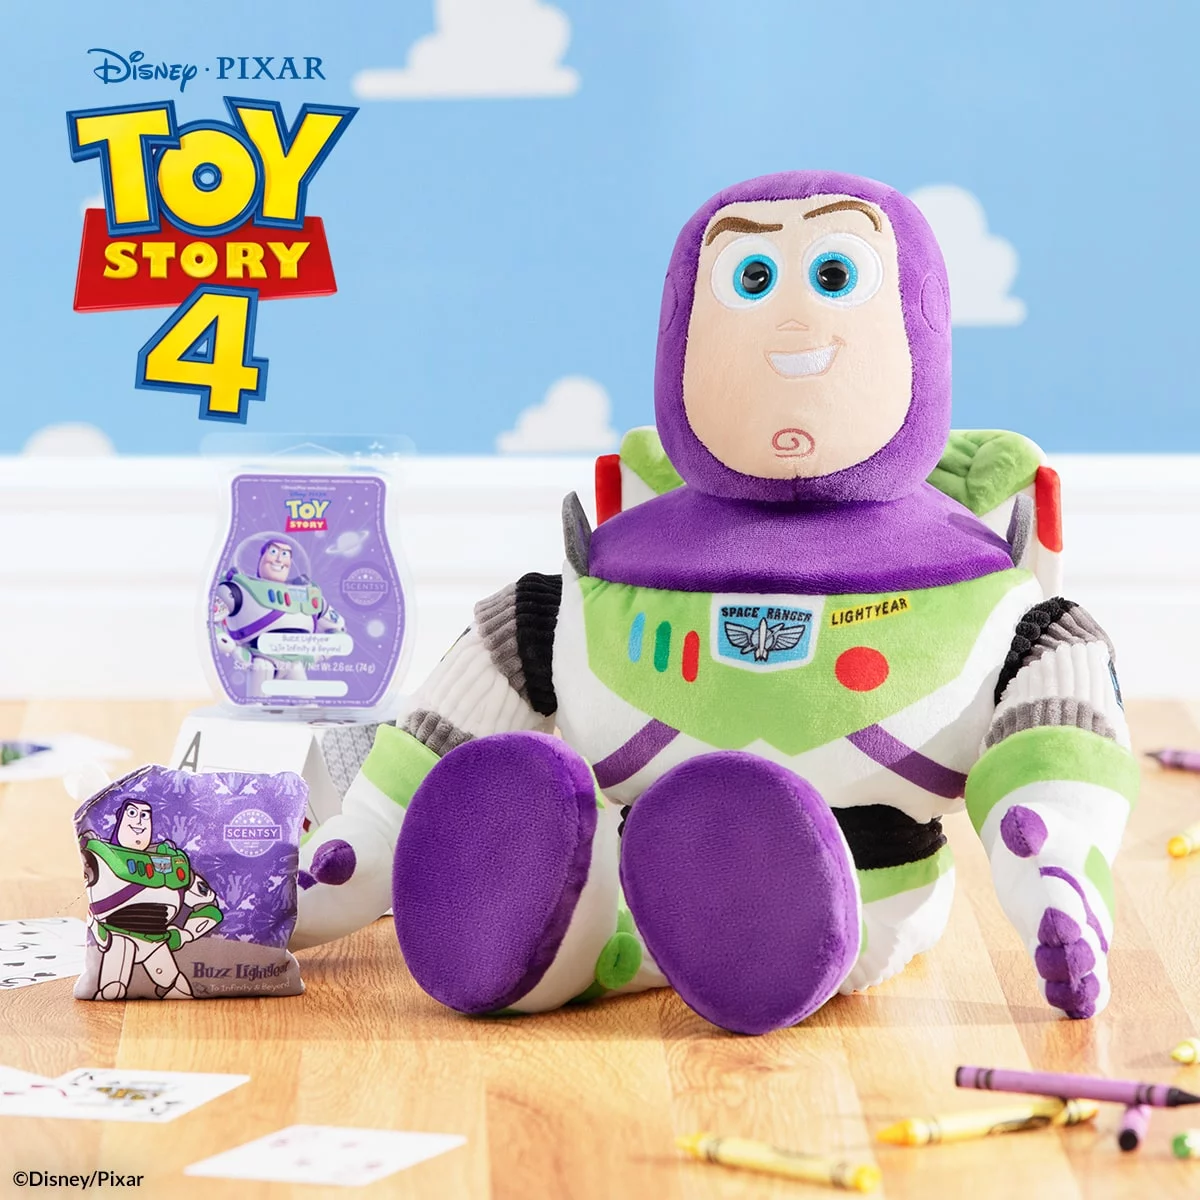 Toy Story 4 - Scentsy Buddies, Buzz Lightyear & Woody - The Candle